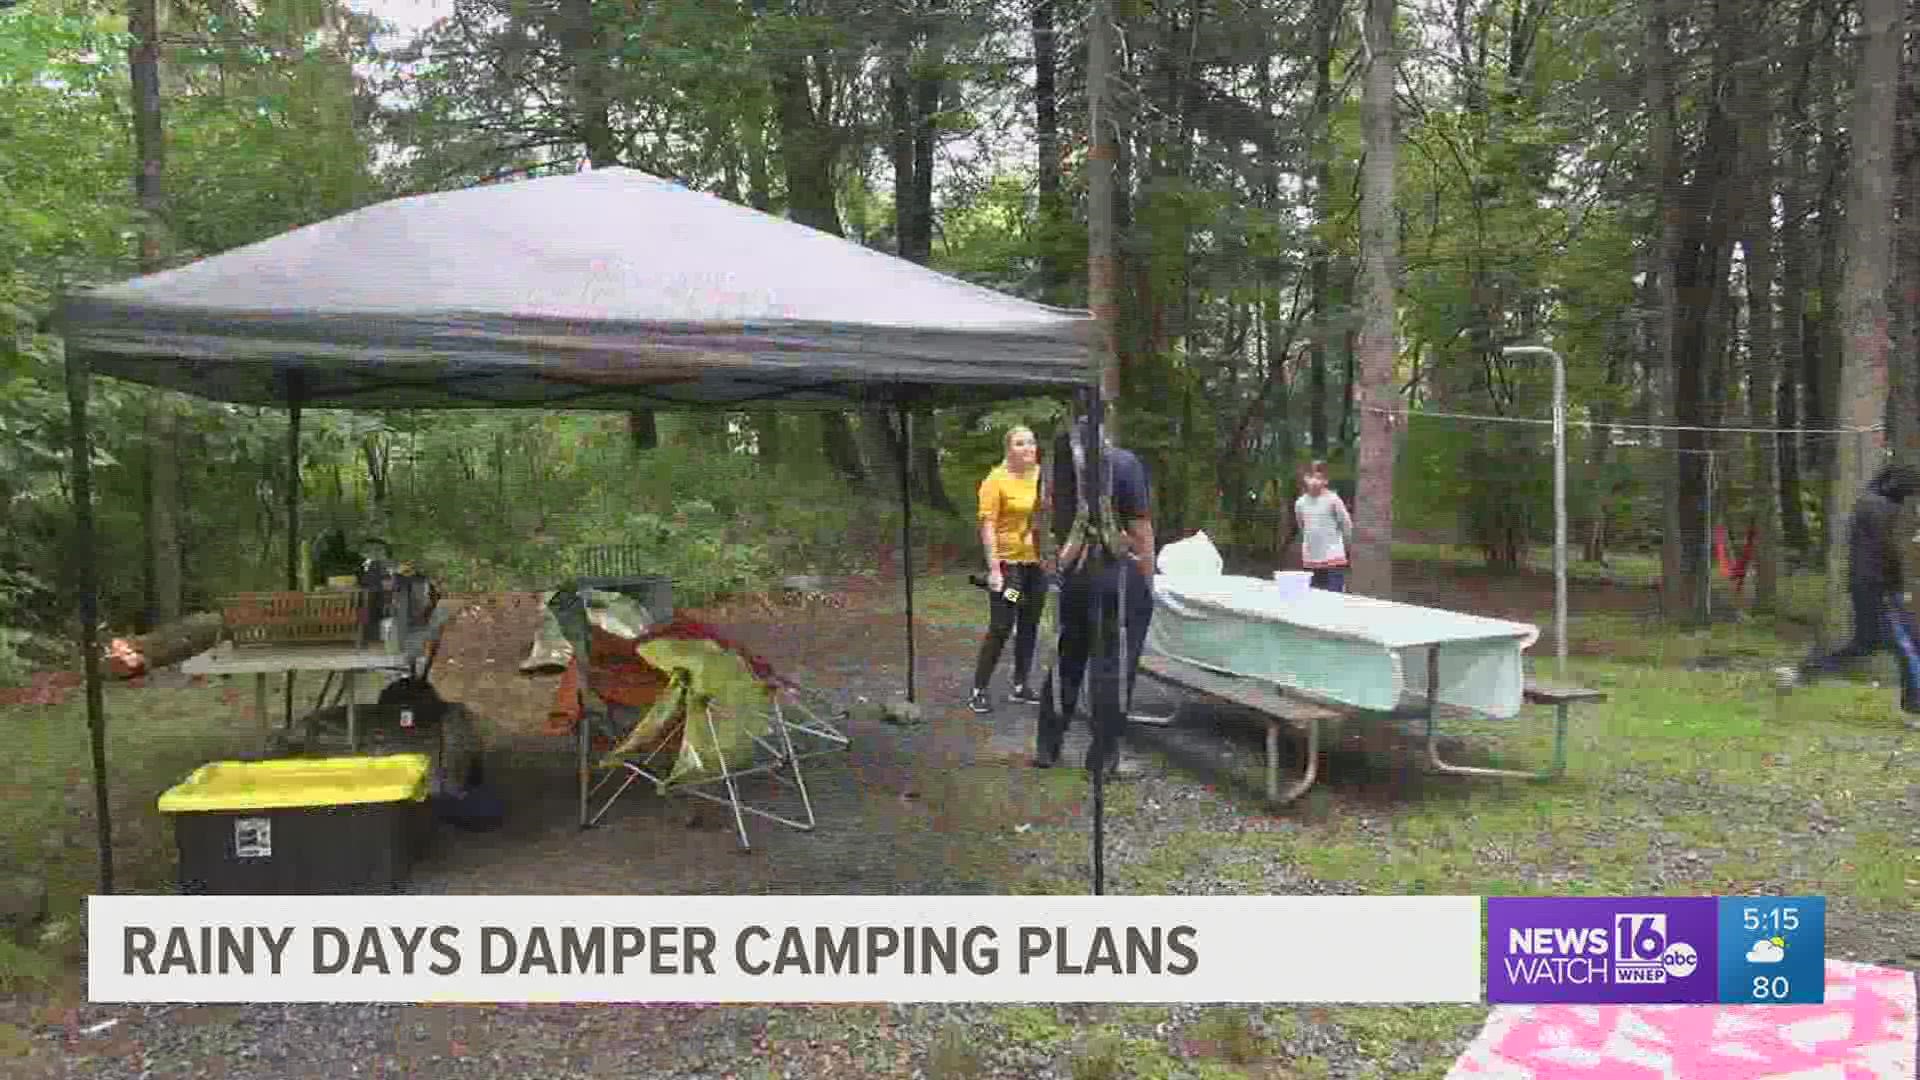 As the summer winds down, people are trying to get in some last-minute vacation time camping, despite the rainy forecast.